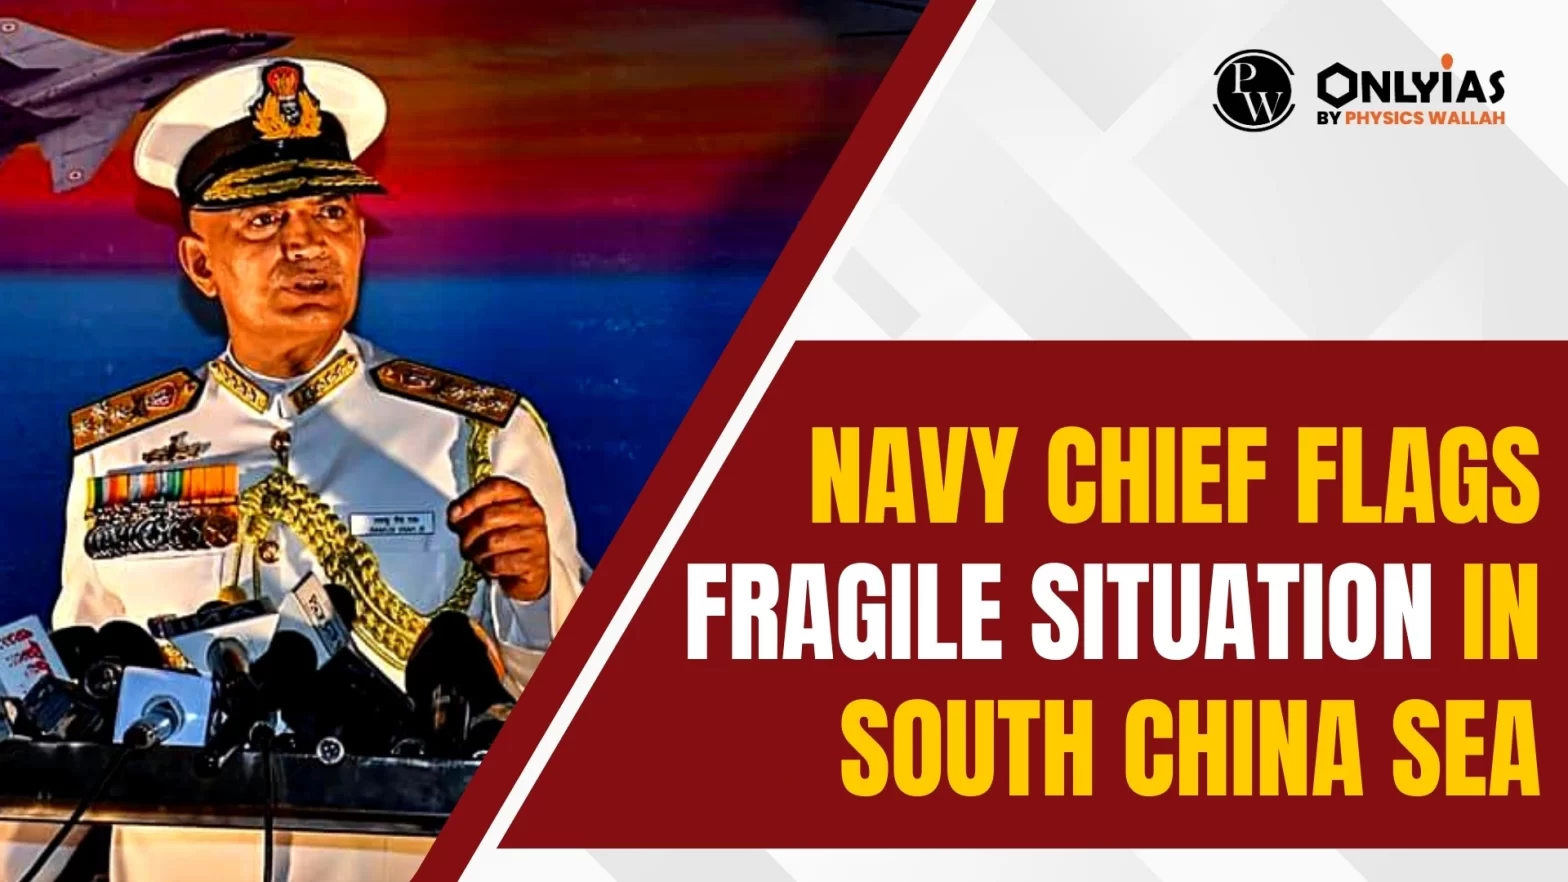 Navy Chief Flags Fragile Situation in South China Sea